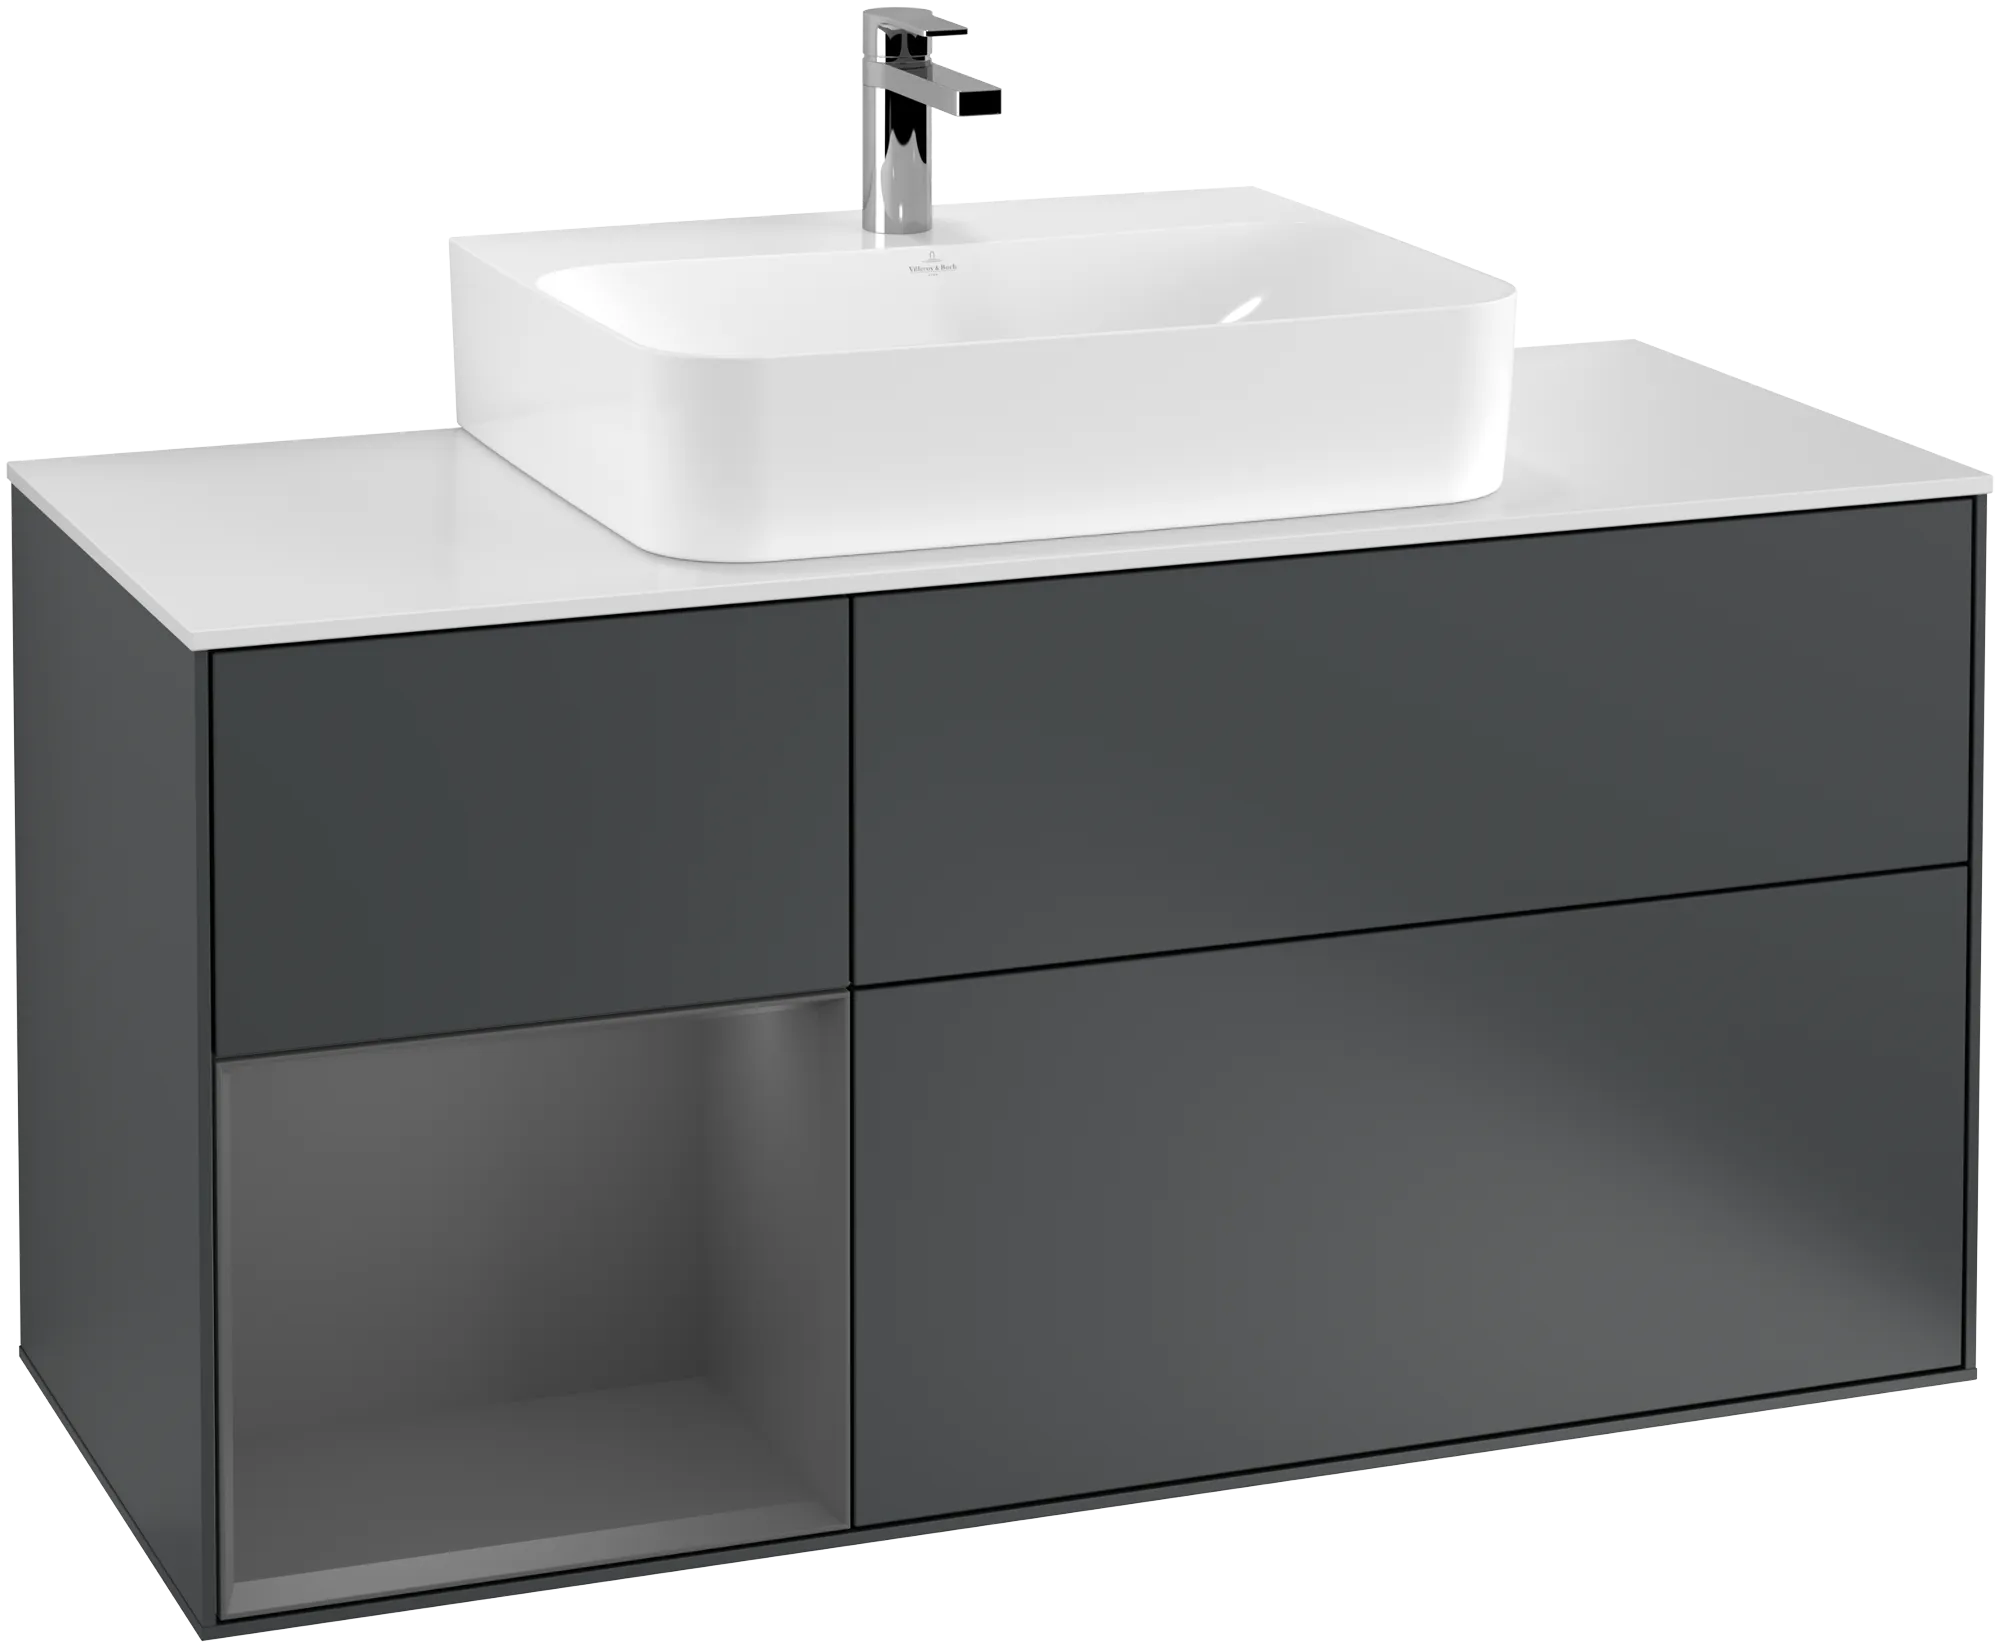 Picture of VILLEROY BOCH Finion Vanity unit, with lighting, 3 pull-out compartments, 1200 x 603 x 501 mm, Midnight Blue Matt Lacquer / Anthracite Matt Lacquer / Glass White Matt #G161GKHG